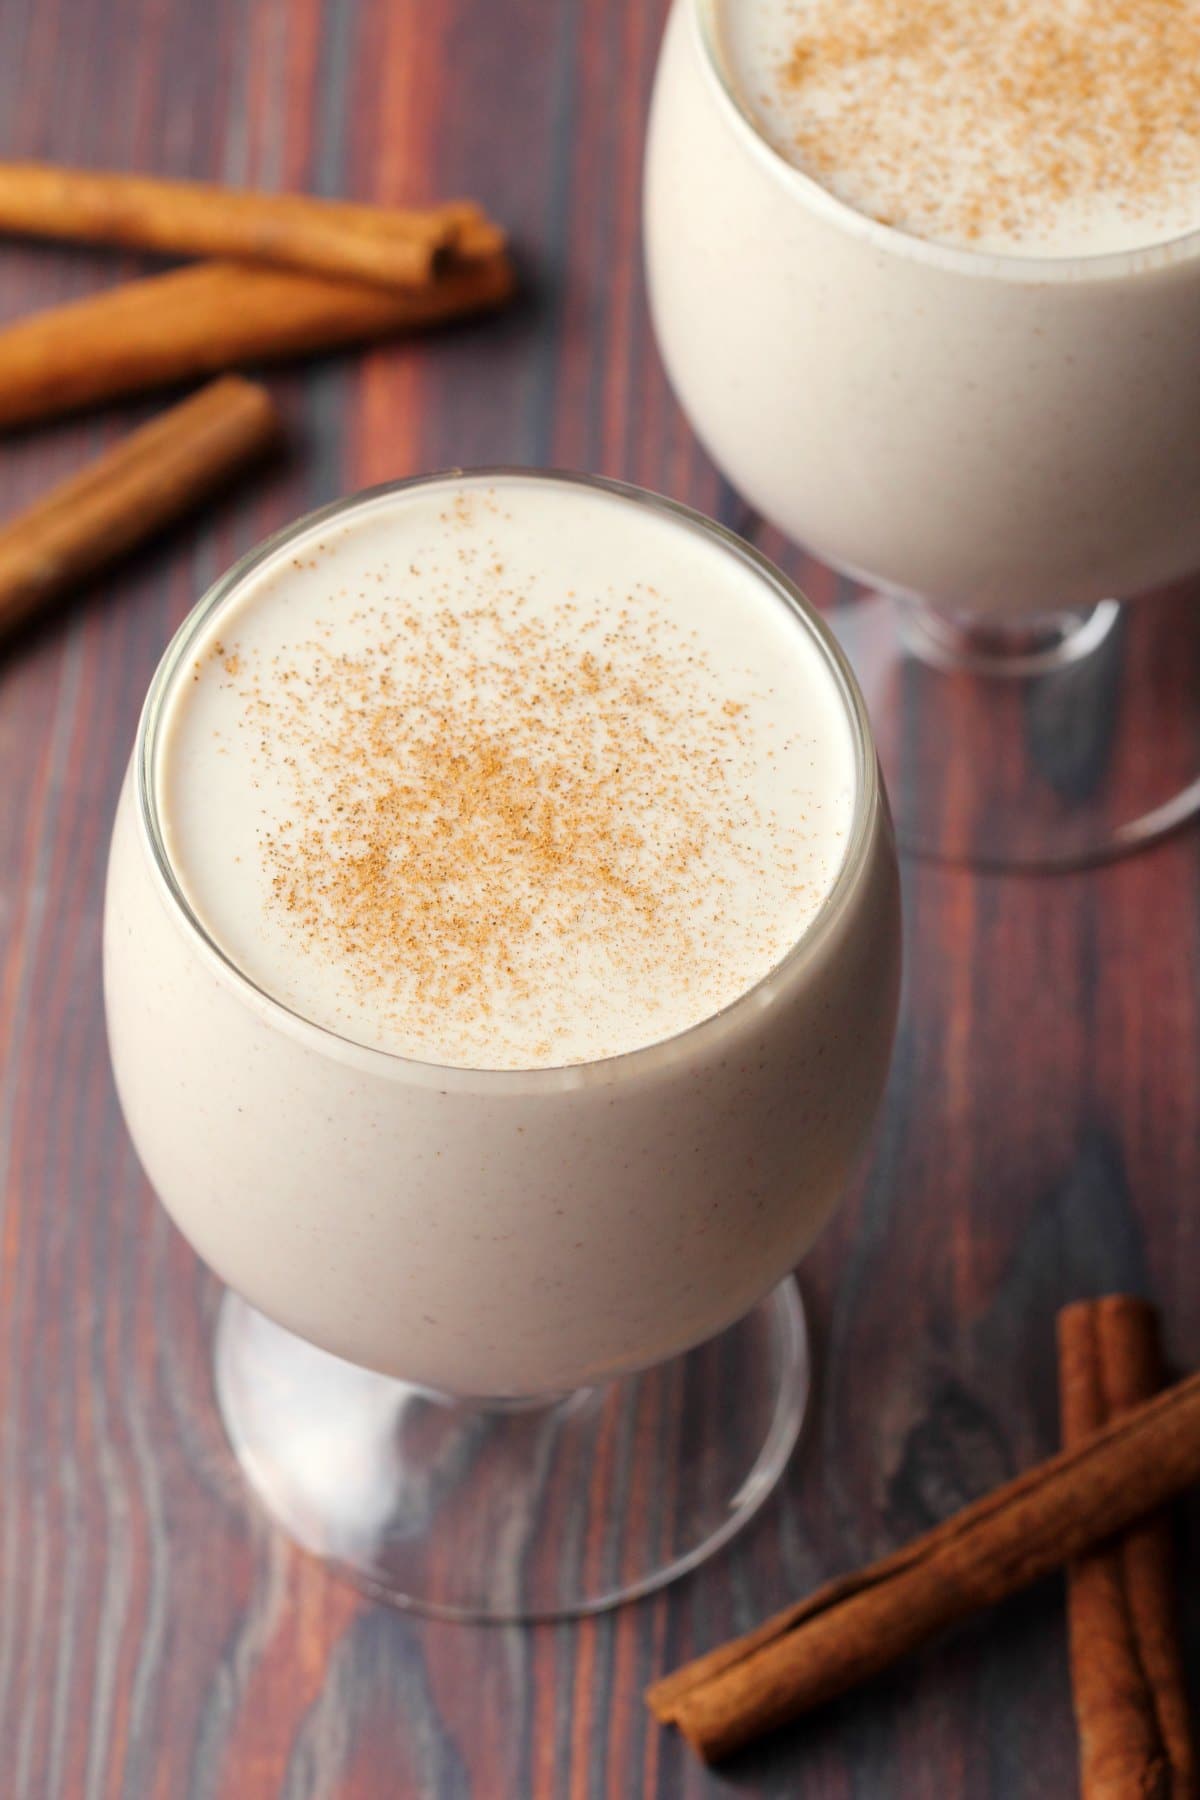 Rich and creamy vegan eggnog made with cashews instead of egg to create a d...